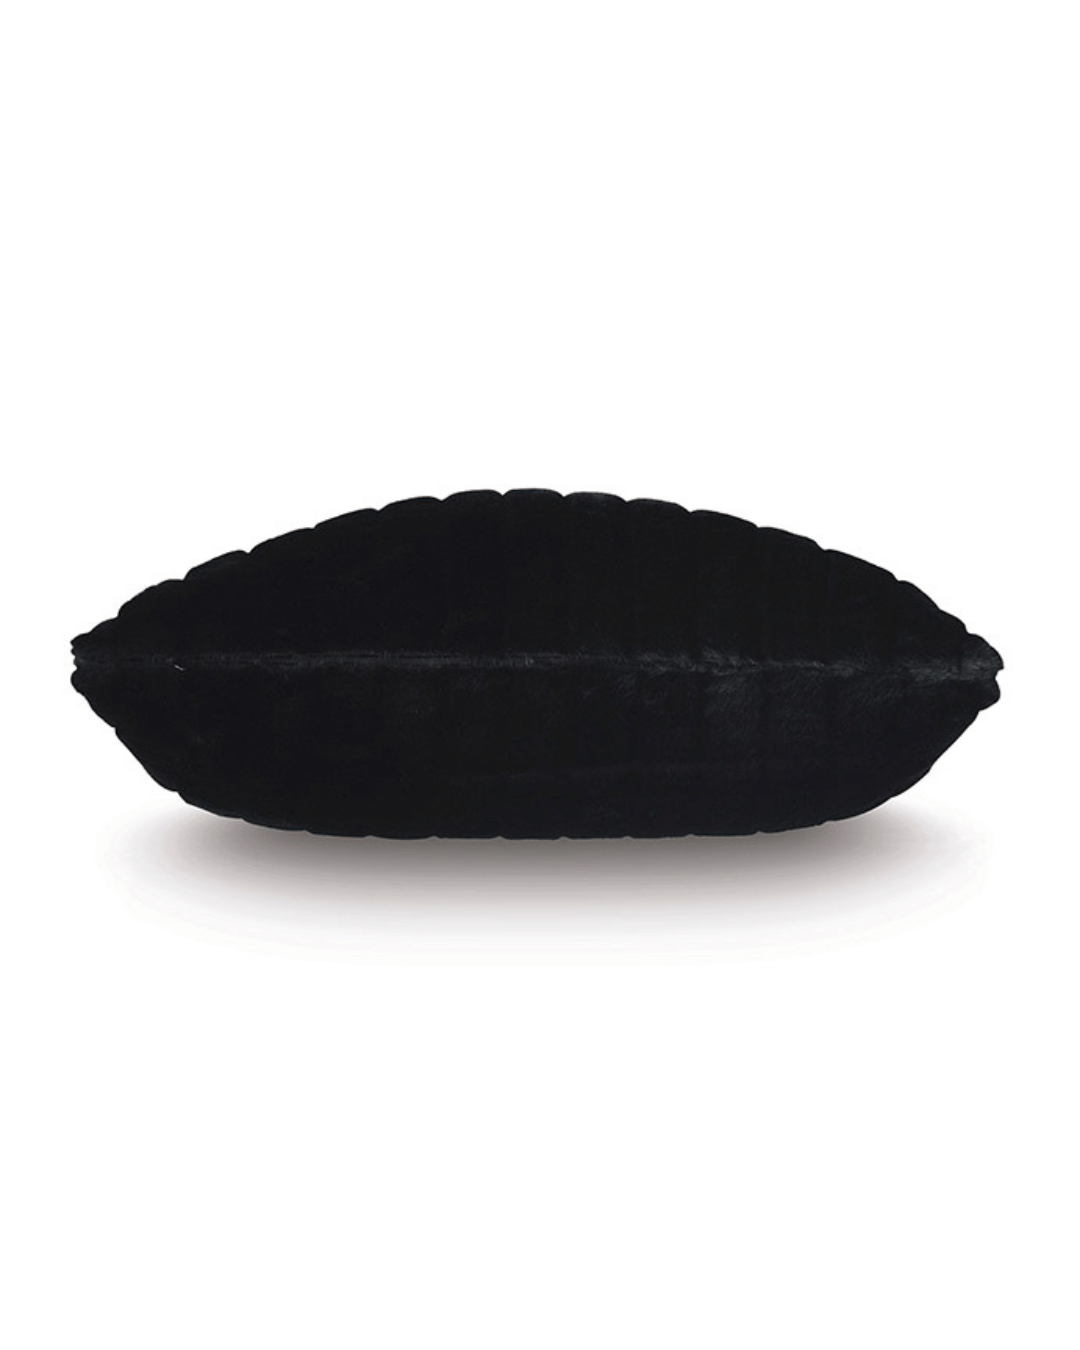 A FAUX FUR EURO SHAM 26x26 by Eastern Accents, with a plush, velvety texture and a luxurious down feather insert. The sham is shown from a side view on a white background.